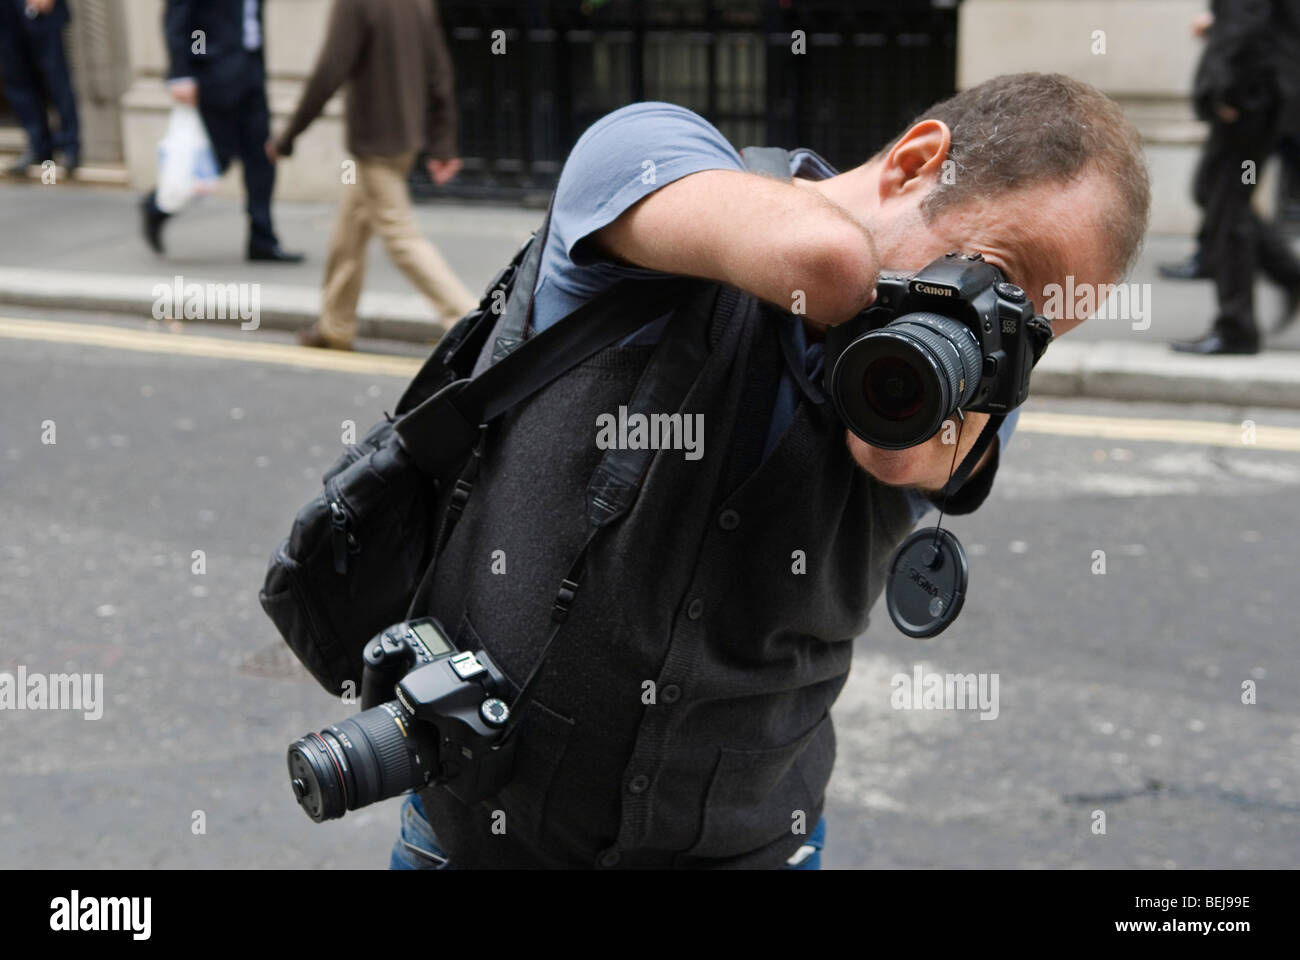 Disabled photographer Simon Smith over coming disabilities UK 2009, 2000s HOMER SYKES Stock Photo